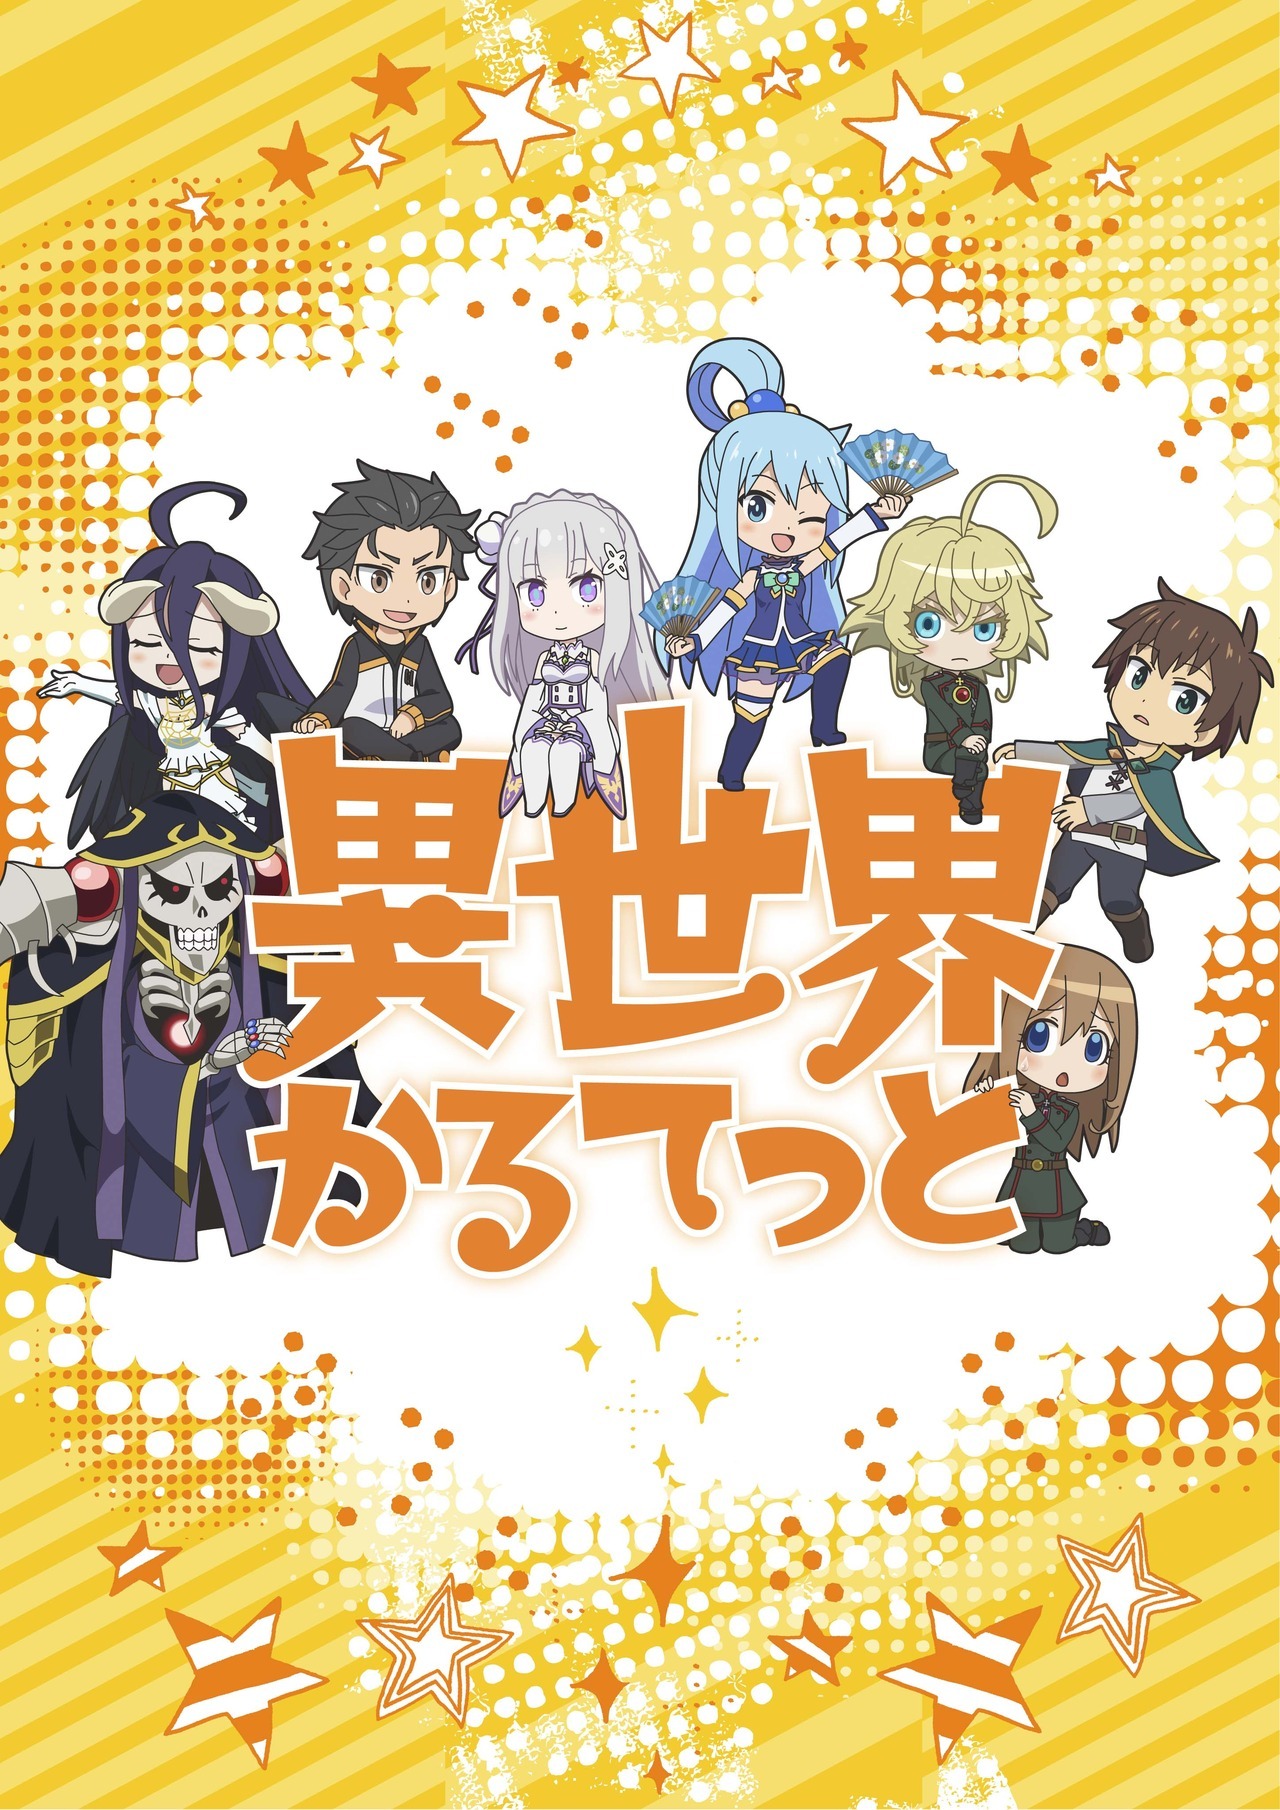 A petit anime crossover project, titled âIsekai Quartet,â is being planned for Spring 2019. It will feature such works as Overlord, KonoSuba, Re:Zero, and Youjo Senki. An announcement PV was also released. -Staff-â¢ Director, Screenplay: Minoru...